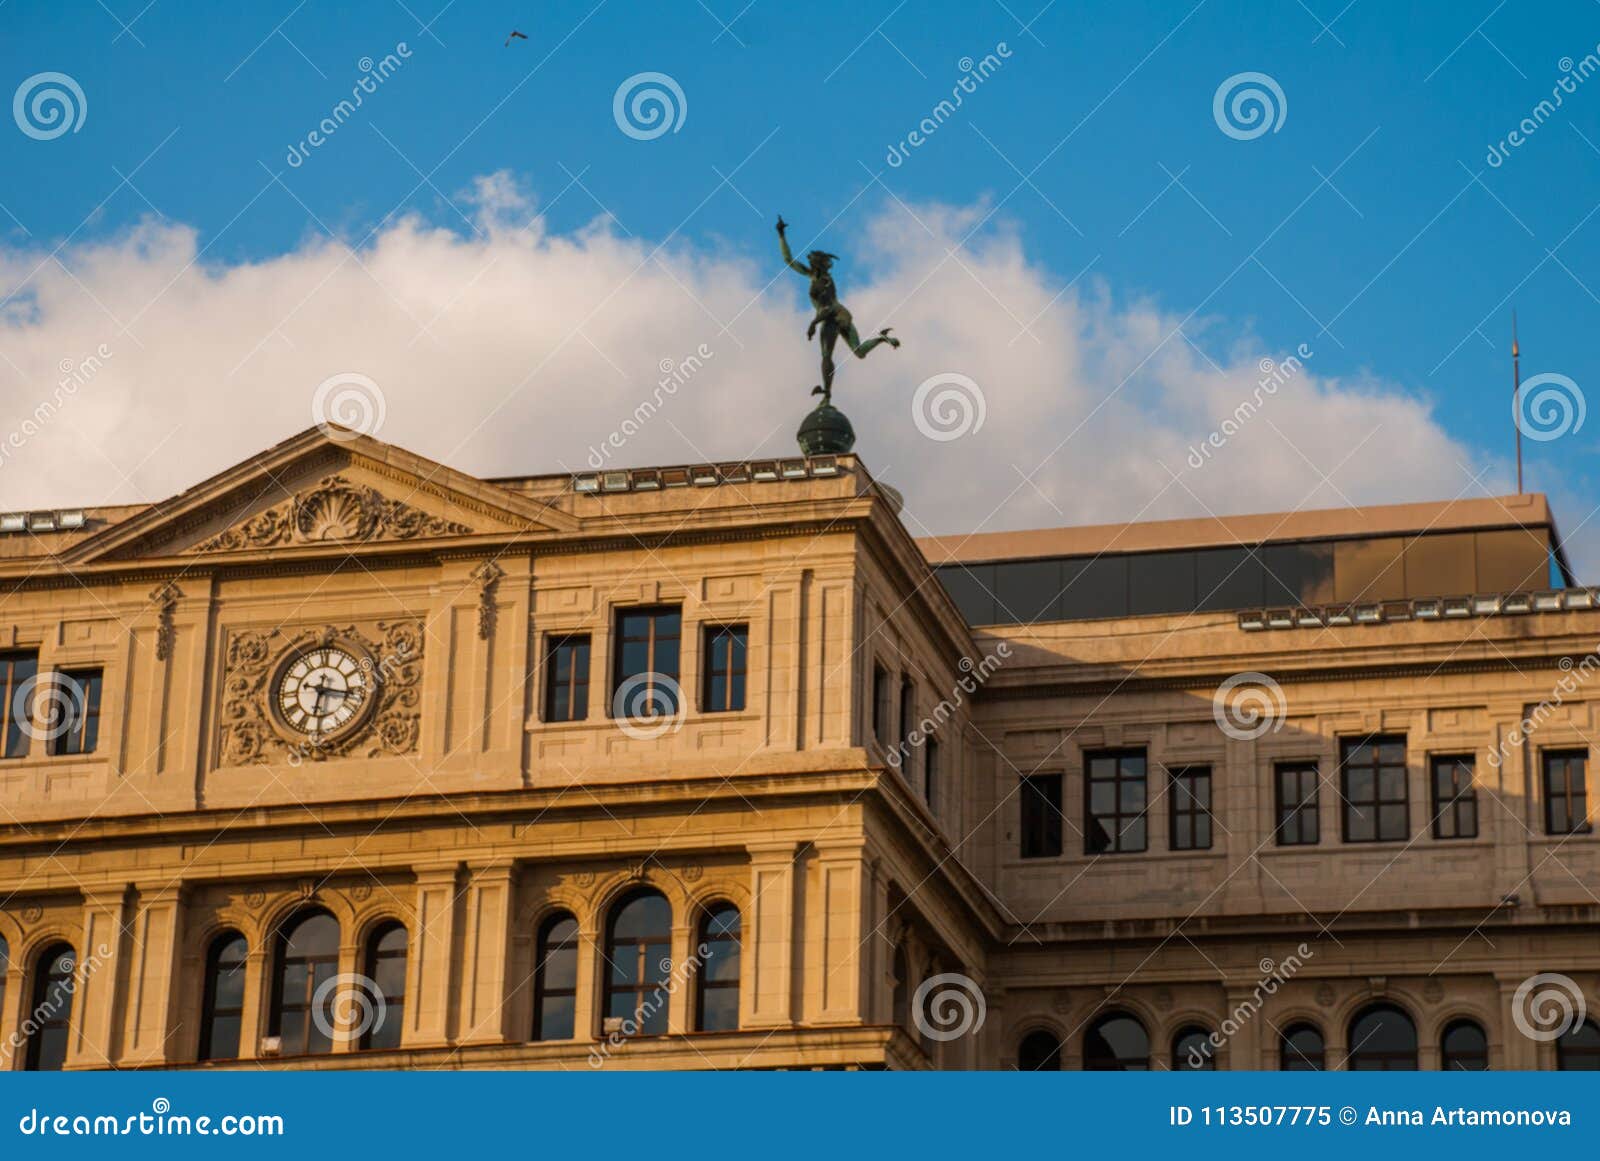 the building of lonja del comercio, stock exchange, now the offices of foreign companies. topped with a statue of mercury, the god